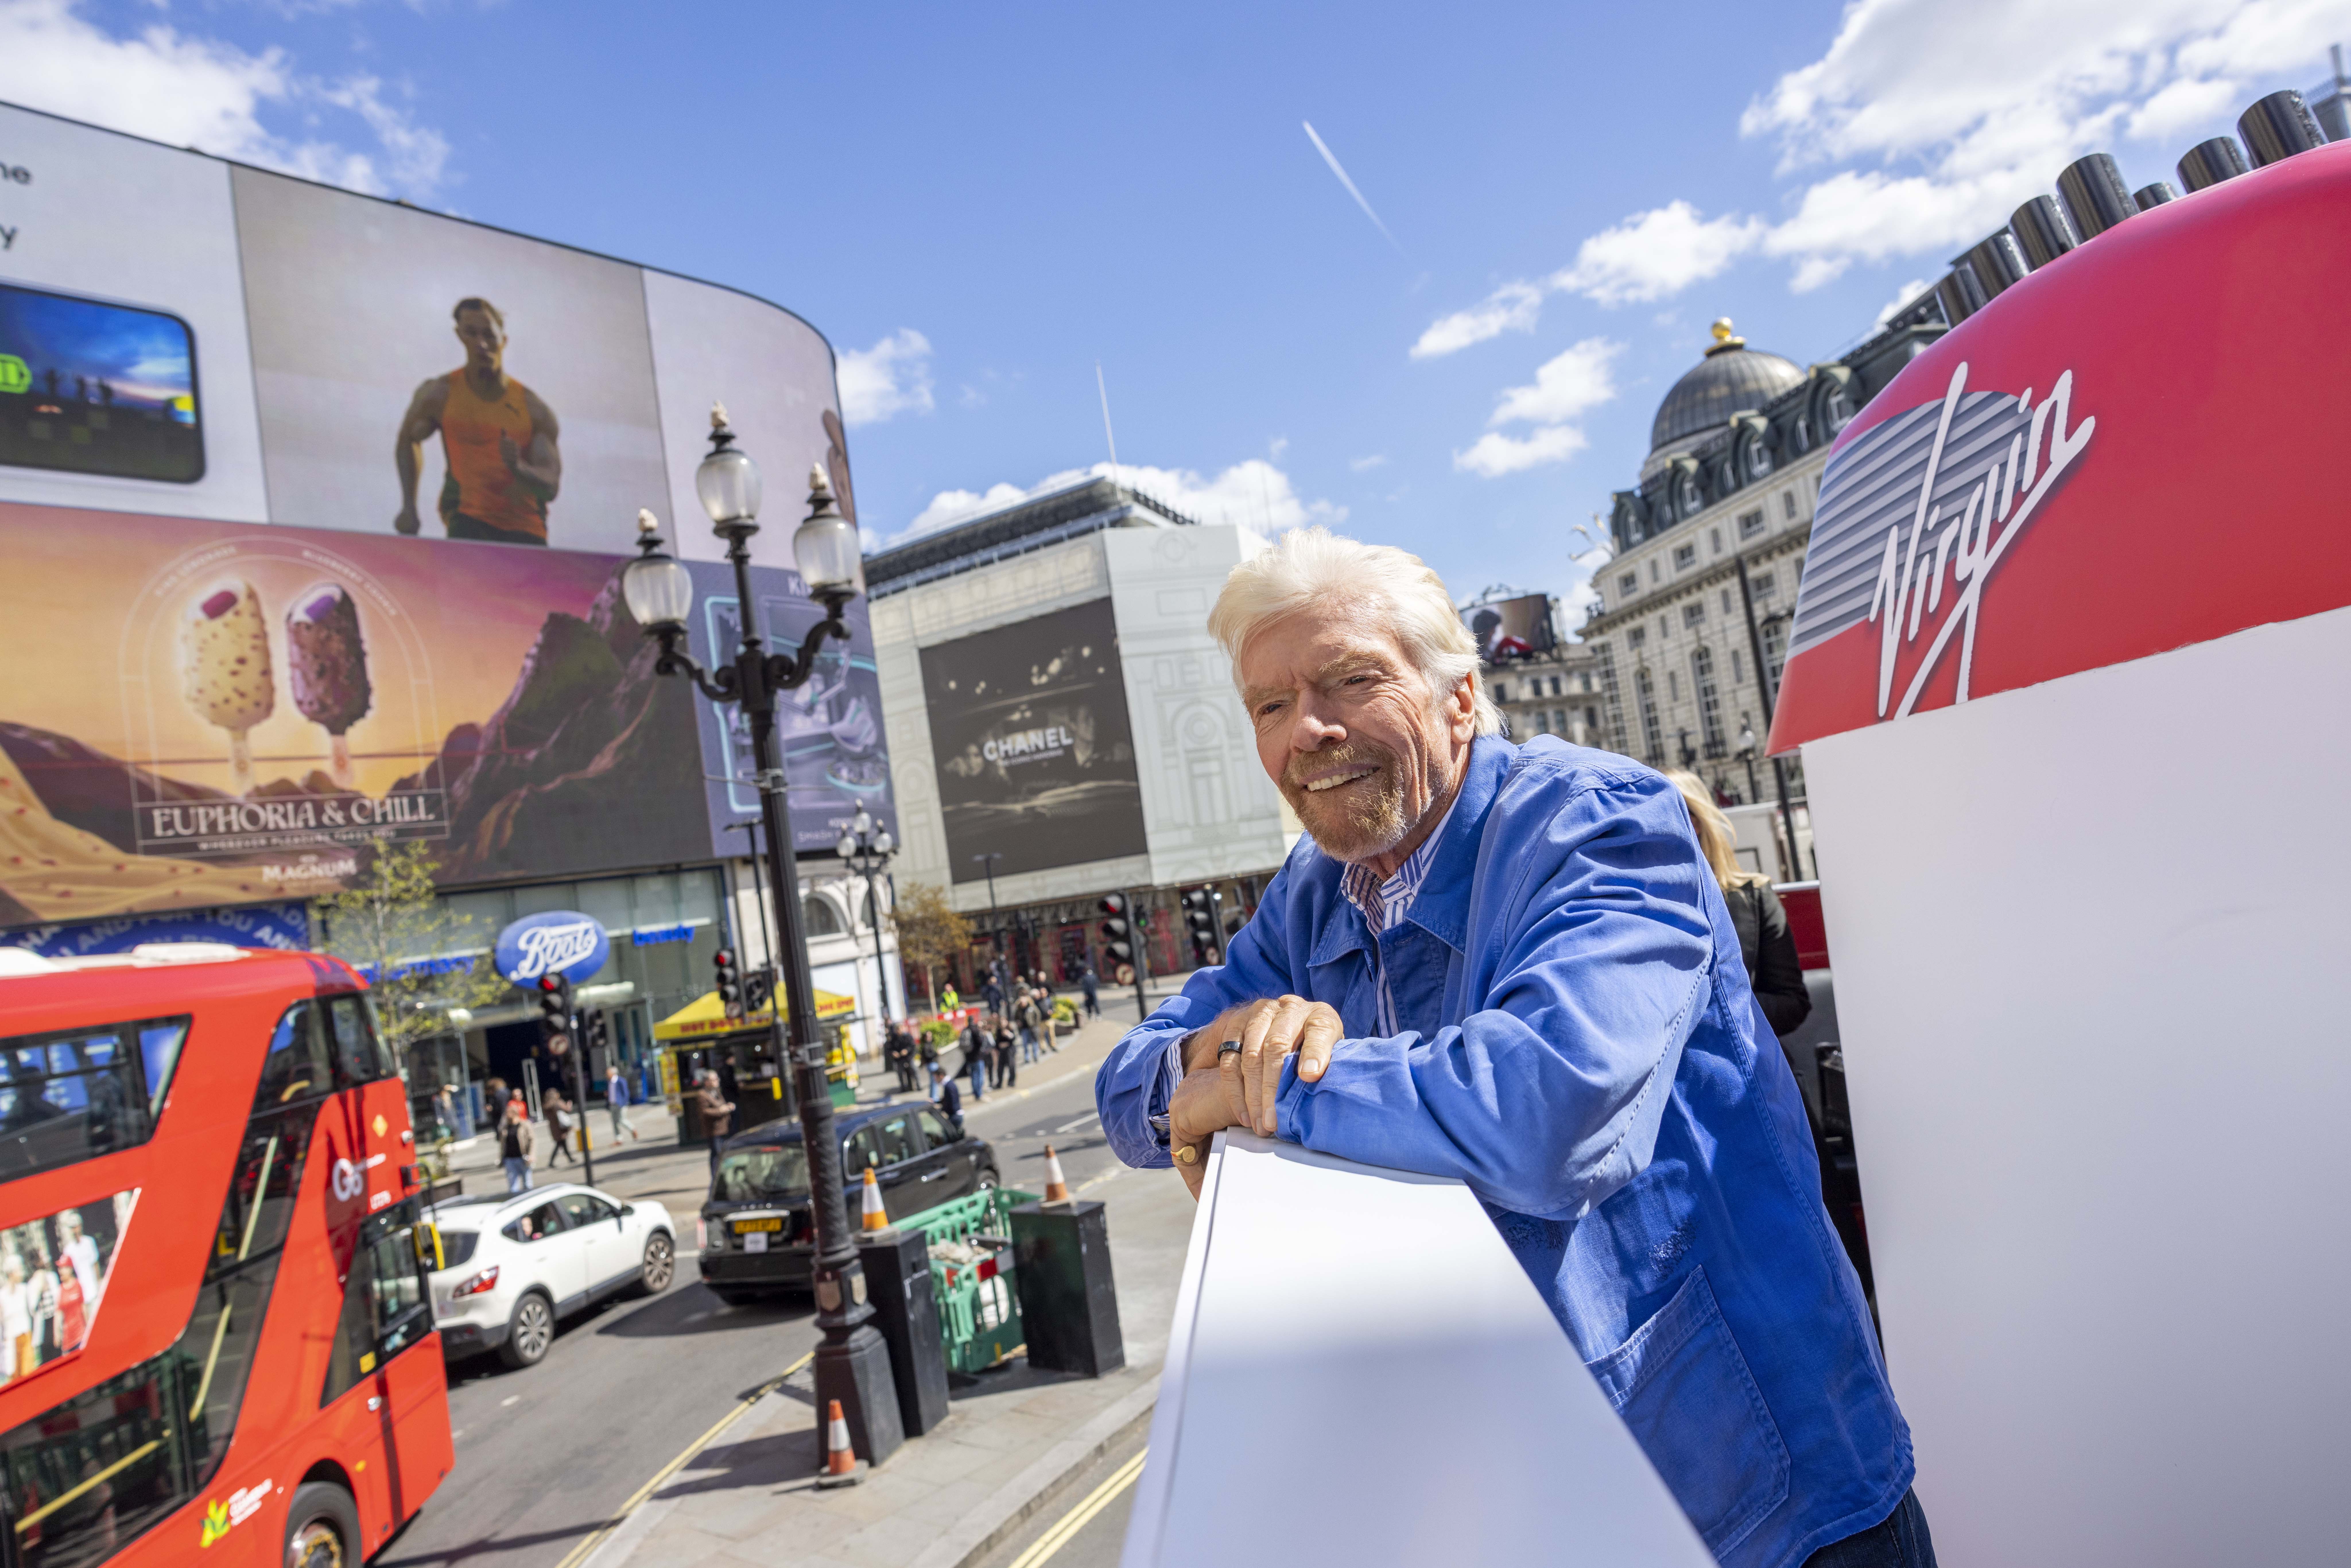 Sir Richard Branson took to the streets to personally hand out 200 free cruise vouchers